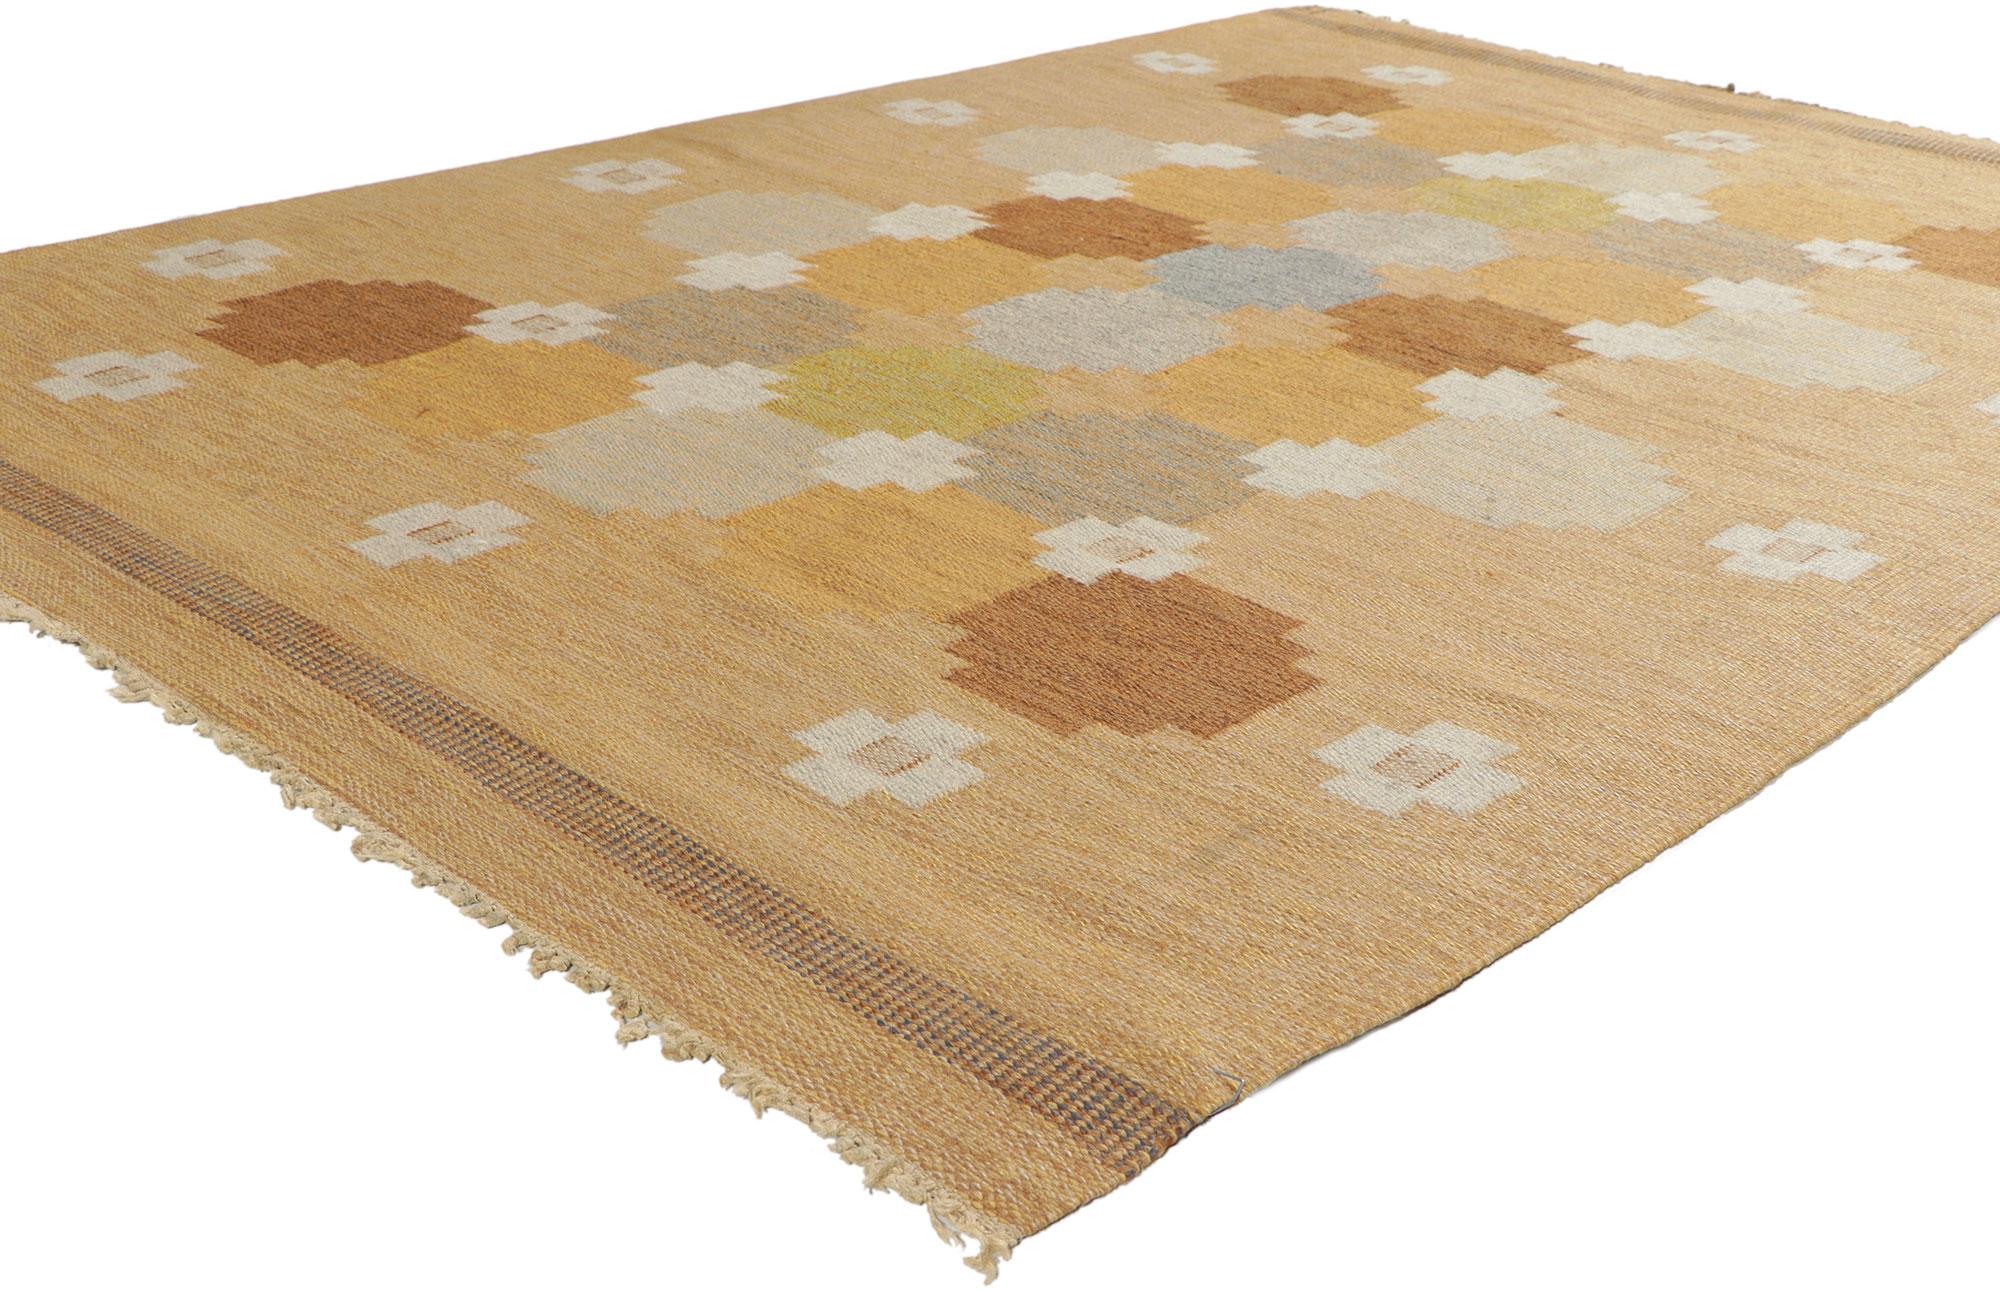 78504 Ingegerd Silow Vintage Swedish Rollakan Rug, 04'06 x 06'08.
Highlighting Scandinavian Modern style with incredible detail and texture, this handwoven Swedish rollakan rug is a captivating vision of woven beauty. The eye-catching graphic